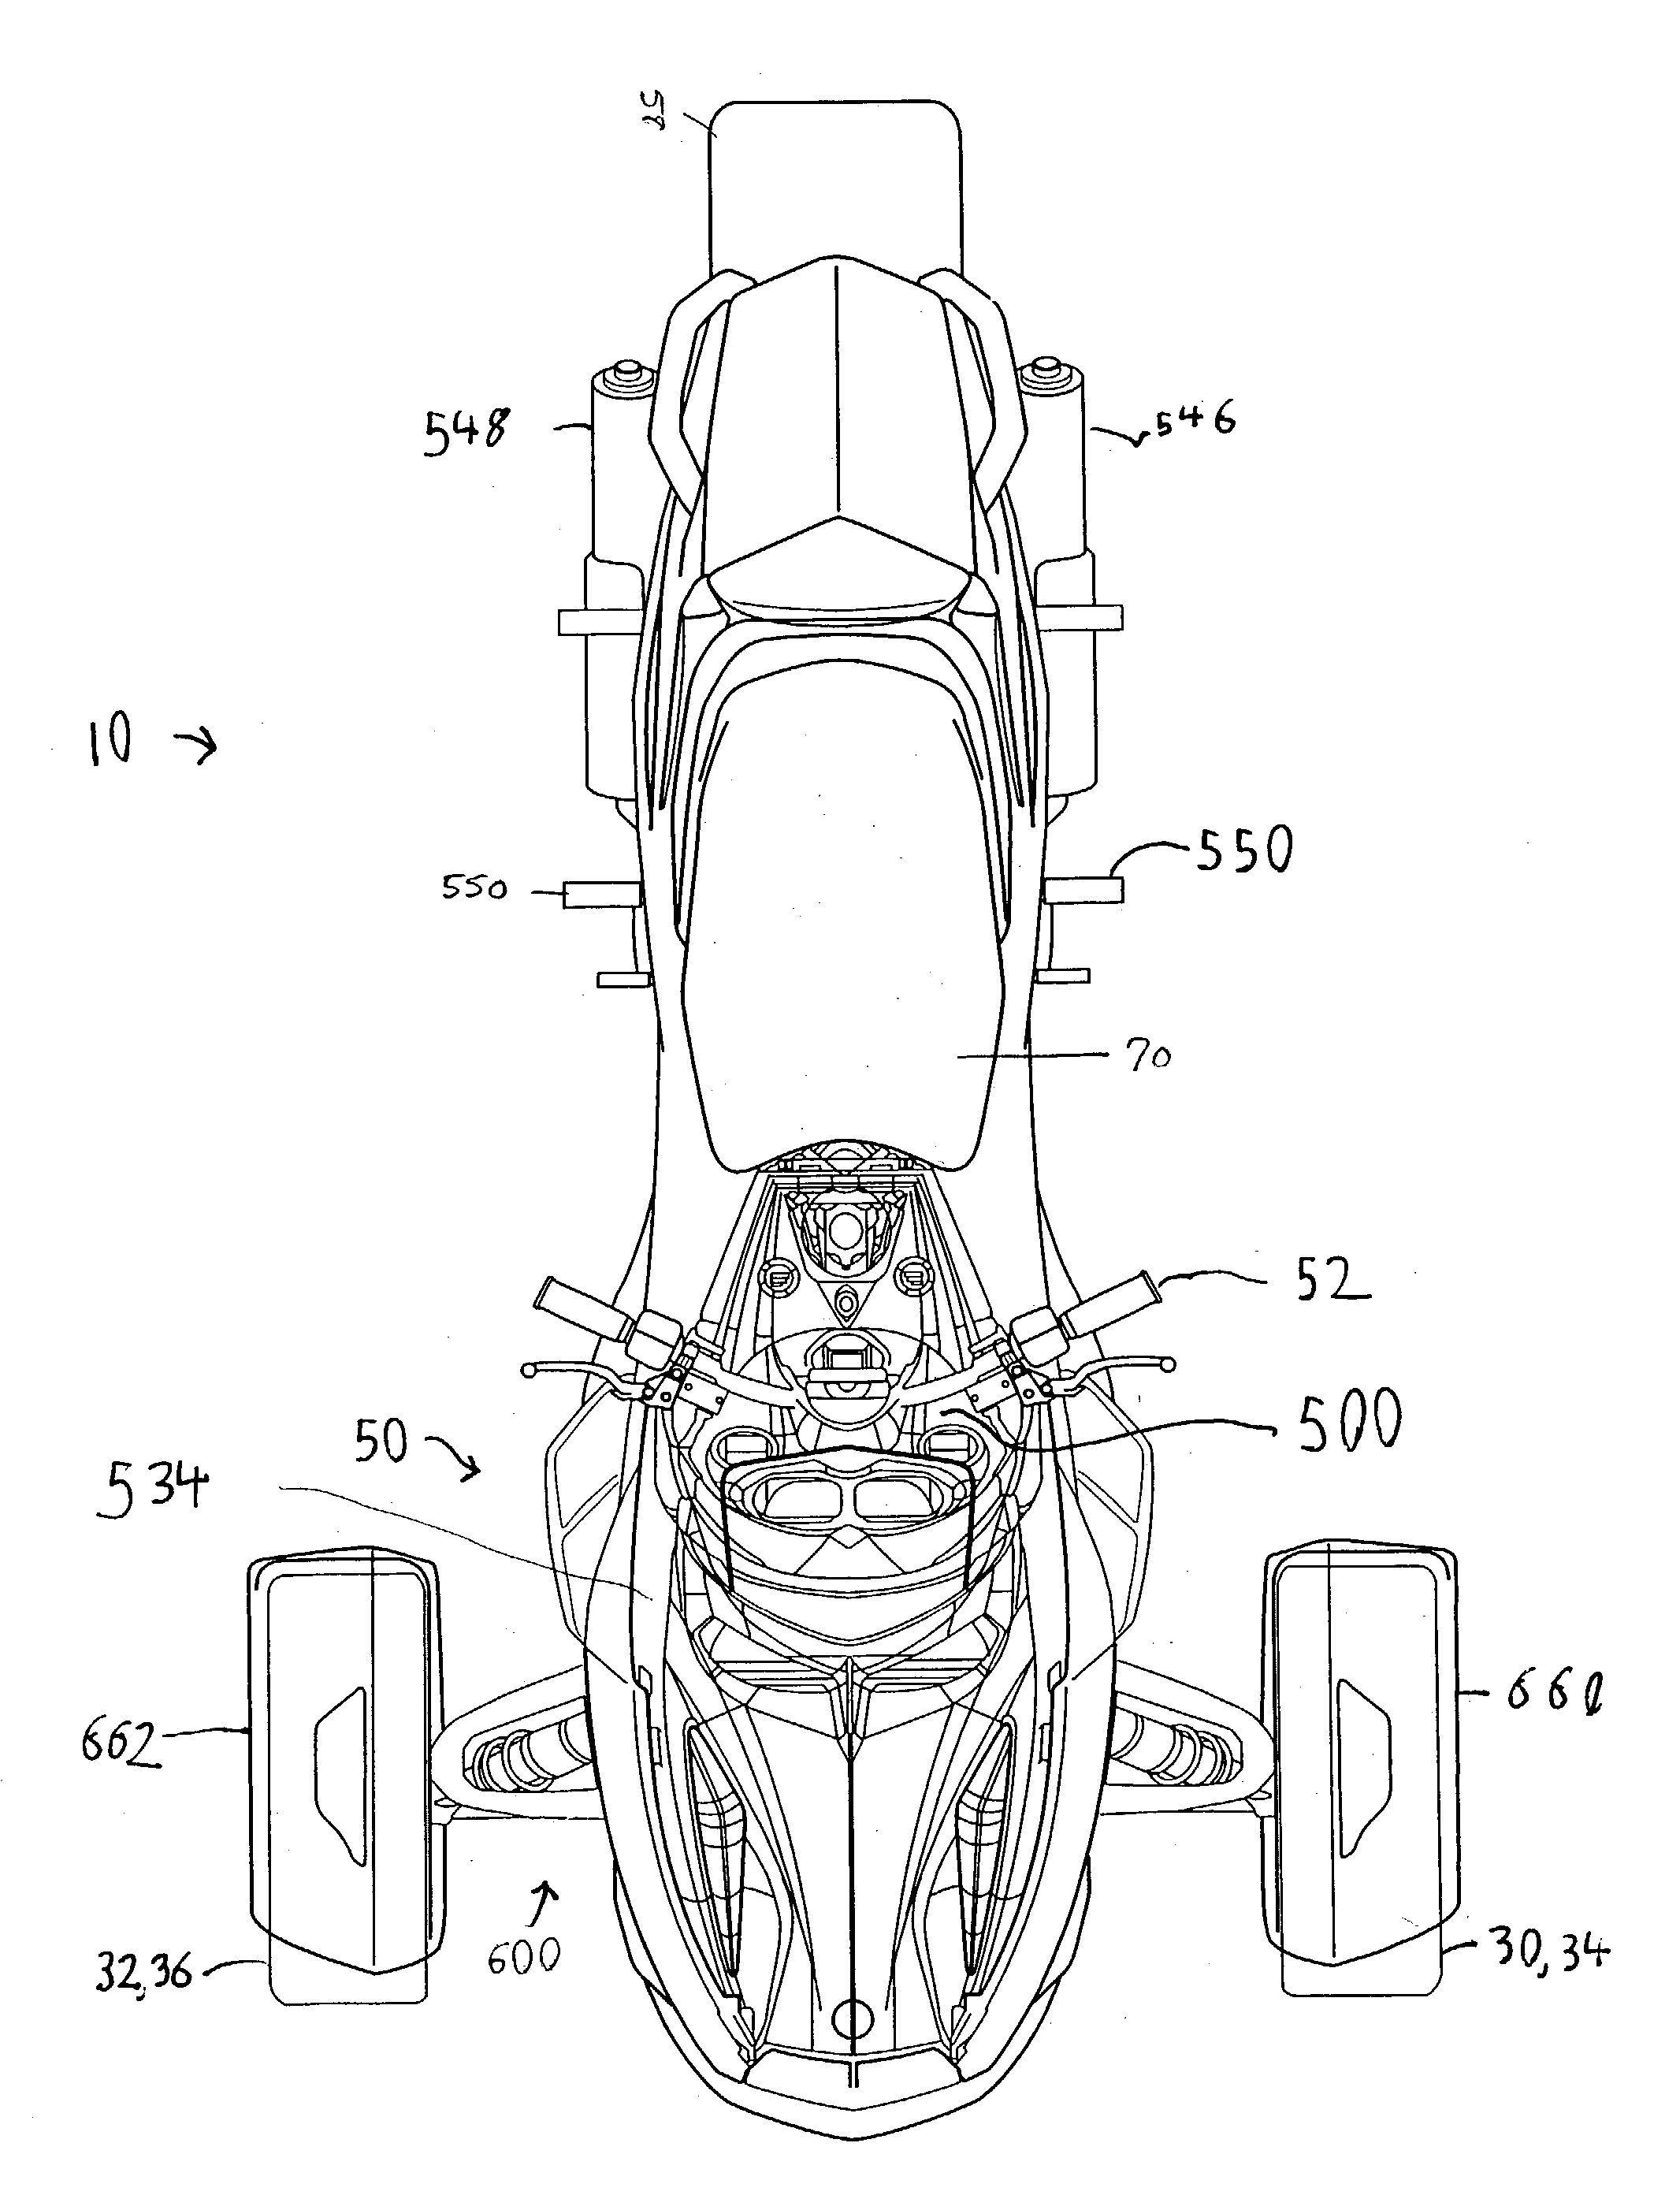 Frame configuration for a three-wheel vehicle